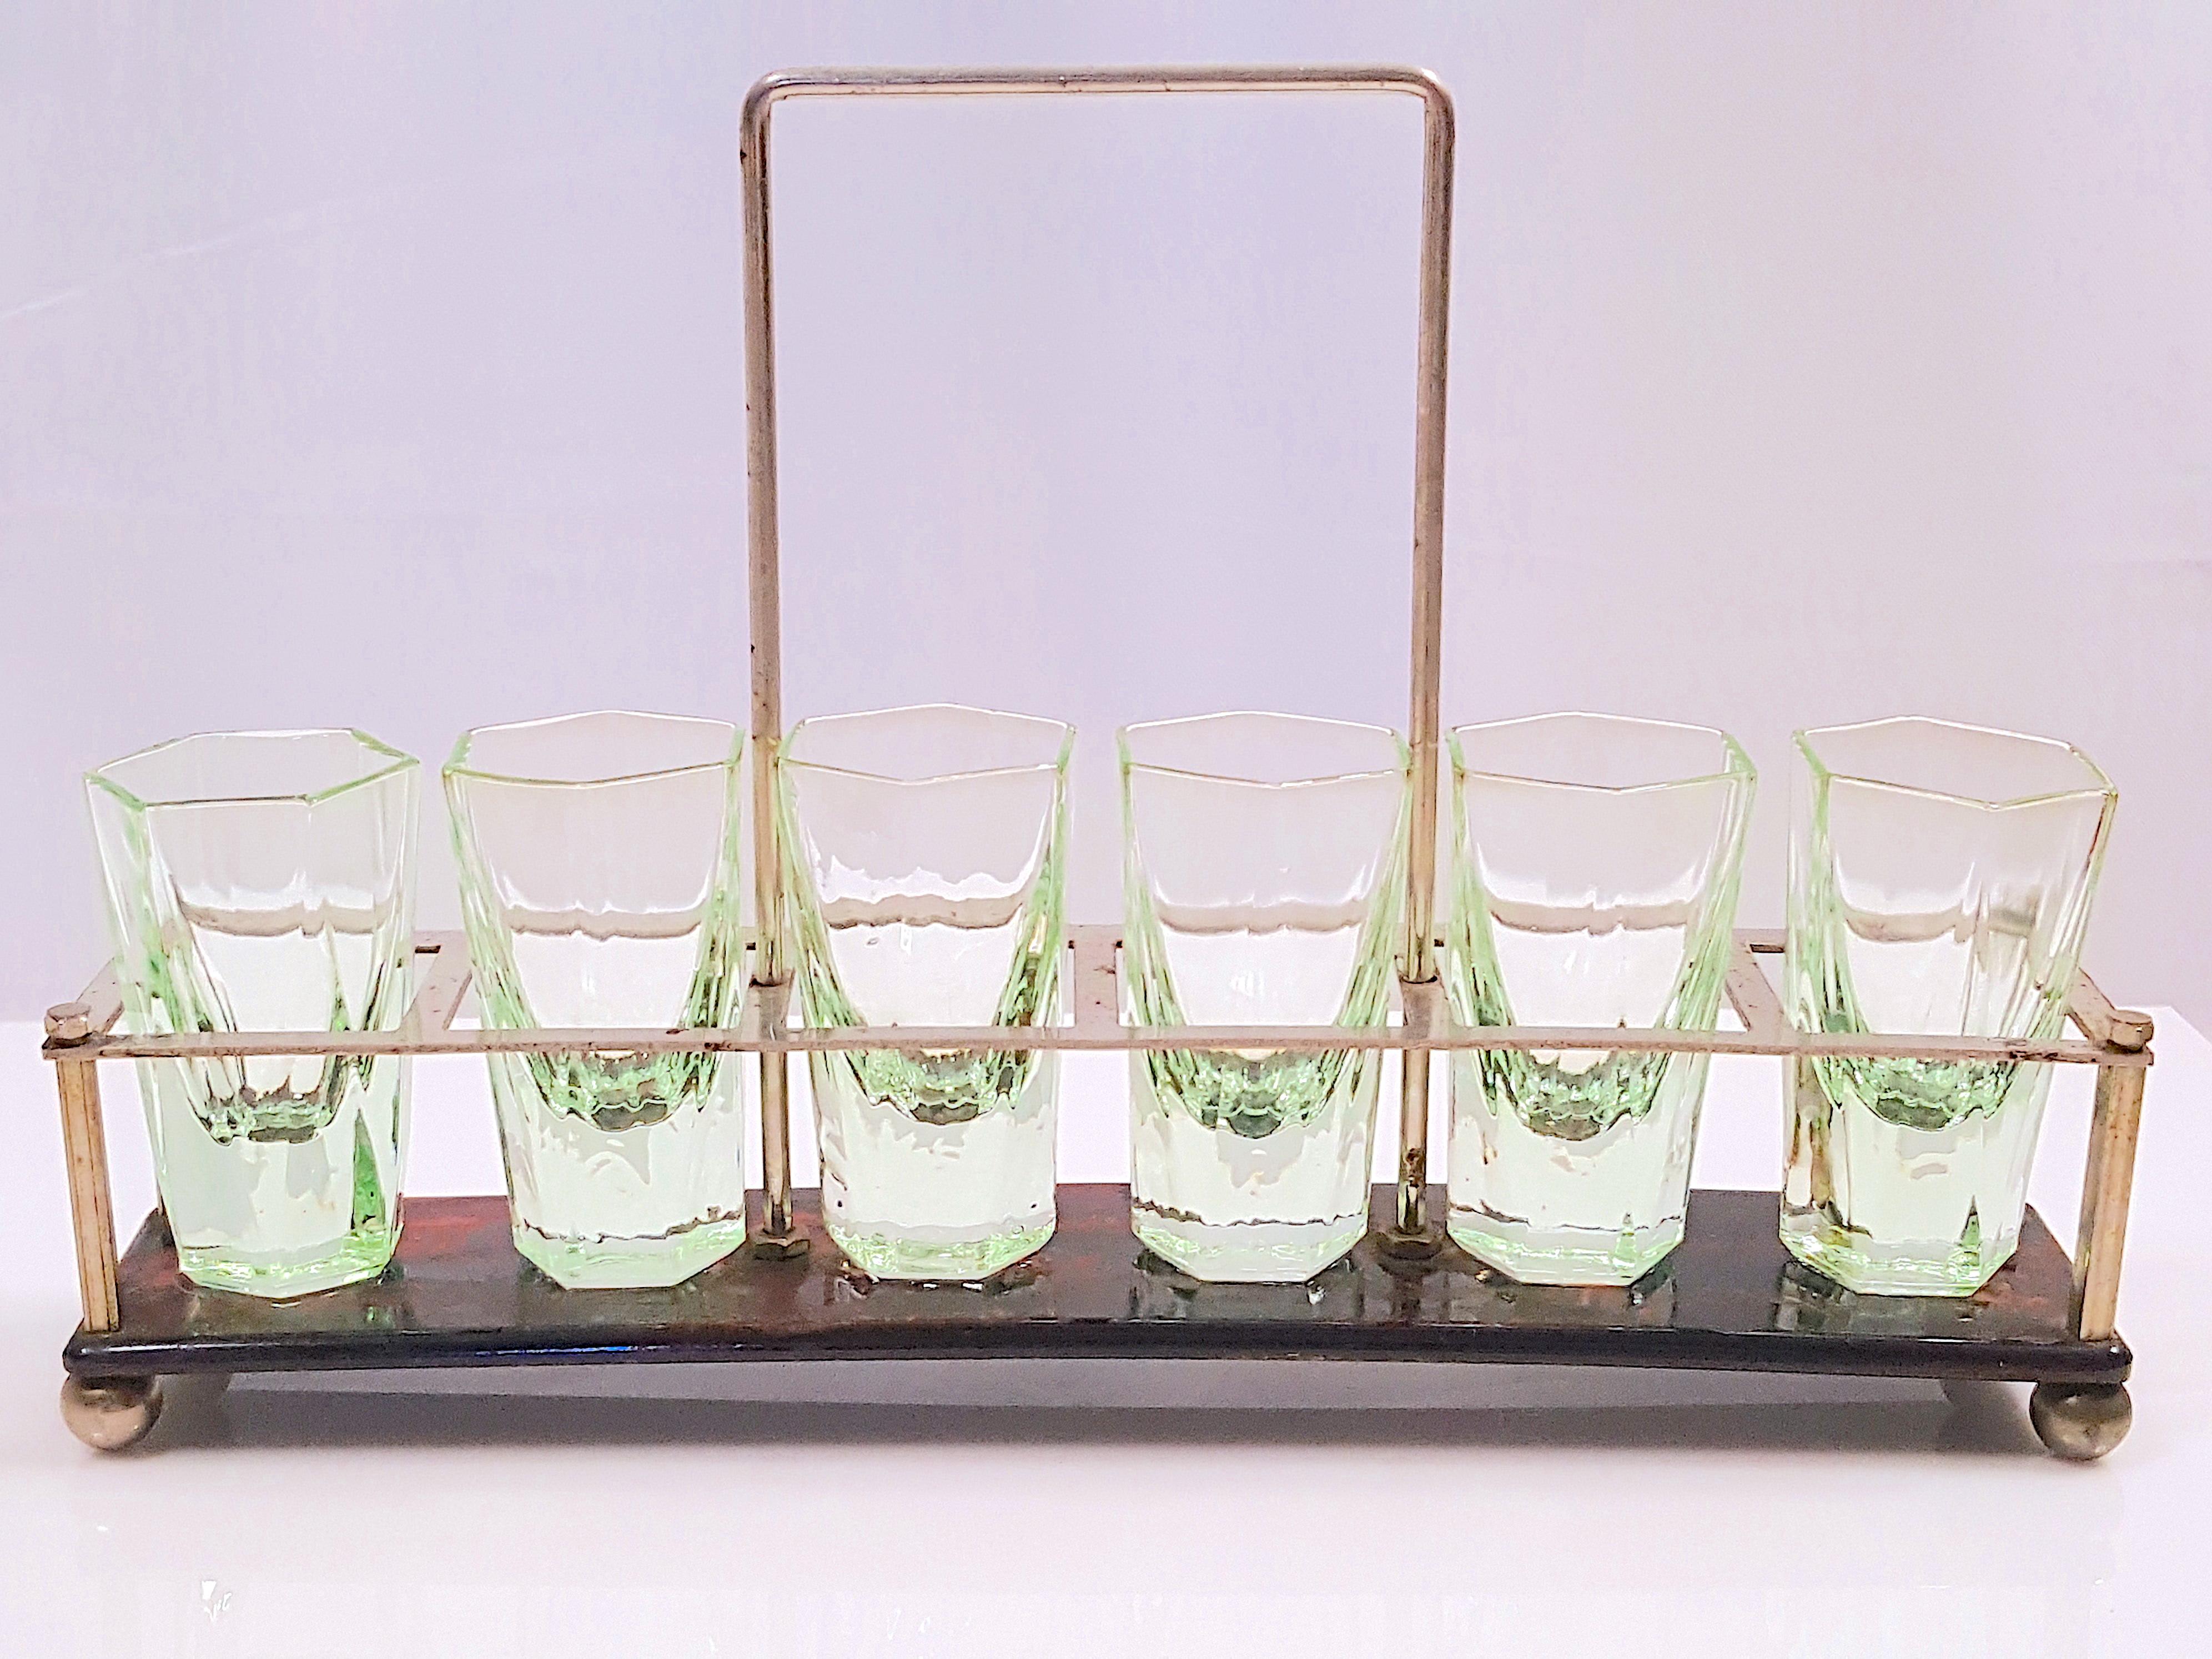 With characteristic combination of materials, construction, and sleek shape by French designer Jacques Adnet before he gained fame designing furnishings for Parisian luxury fashion house Hermes, this ArtDeco-period bar set with 1920s color-palette